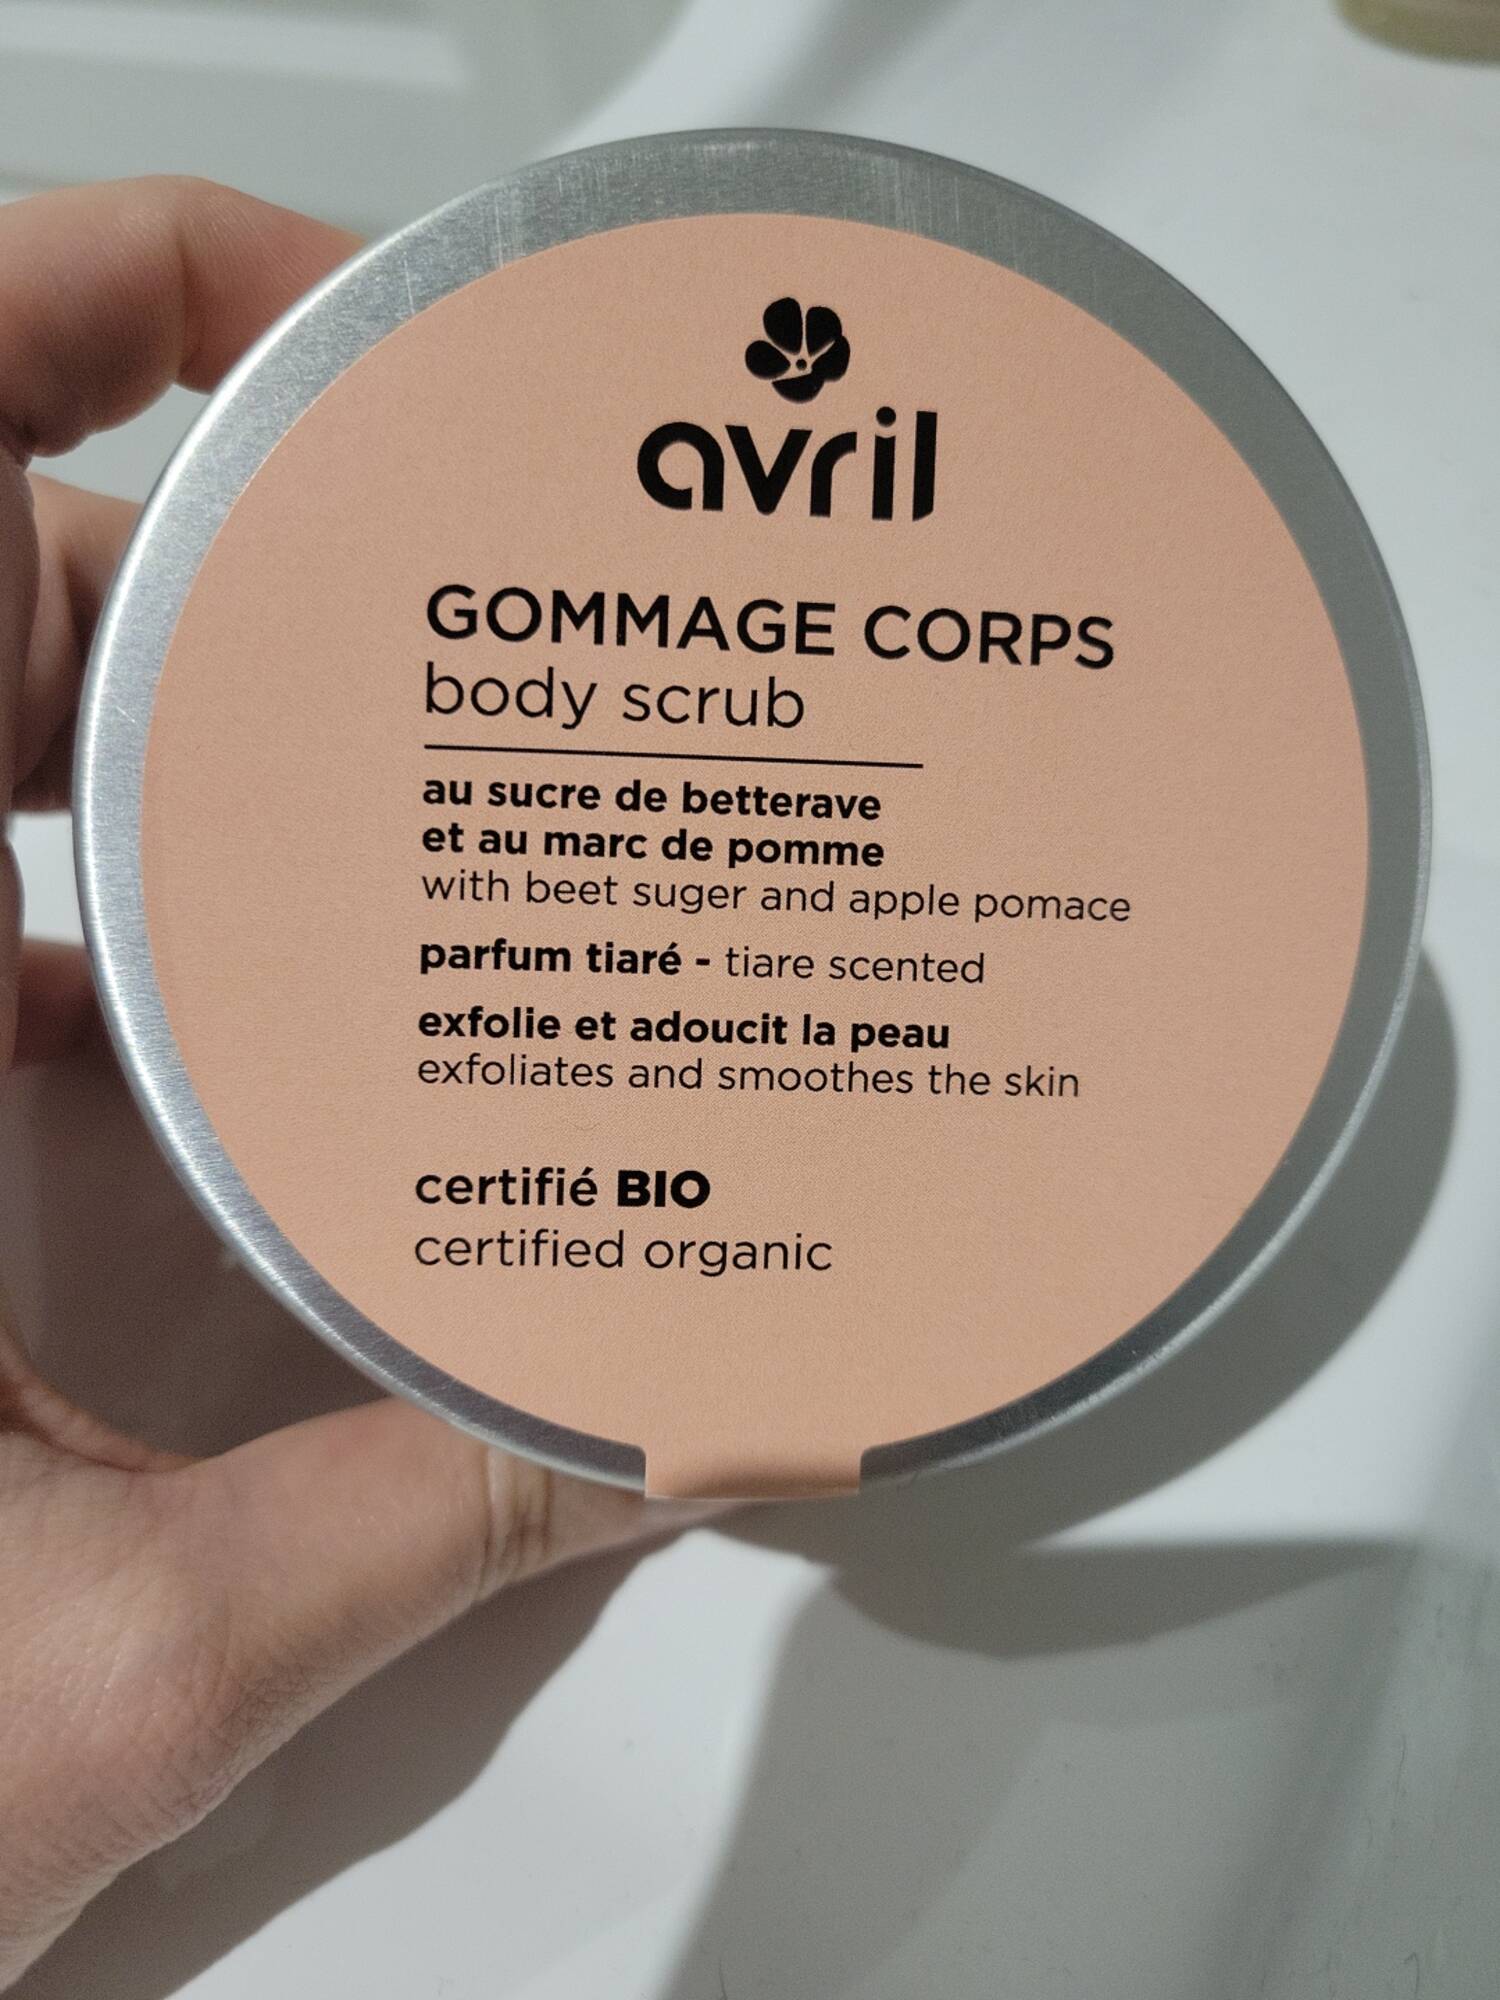 AVRIL - Gommage corps